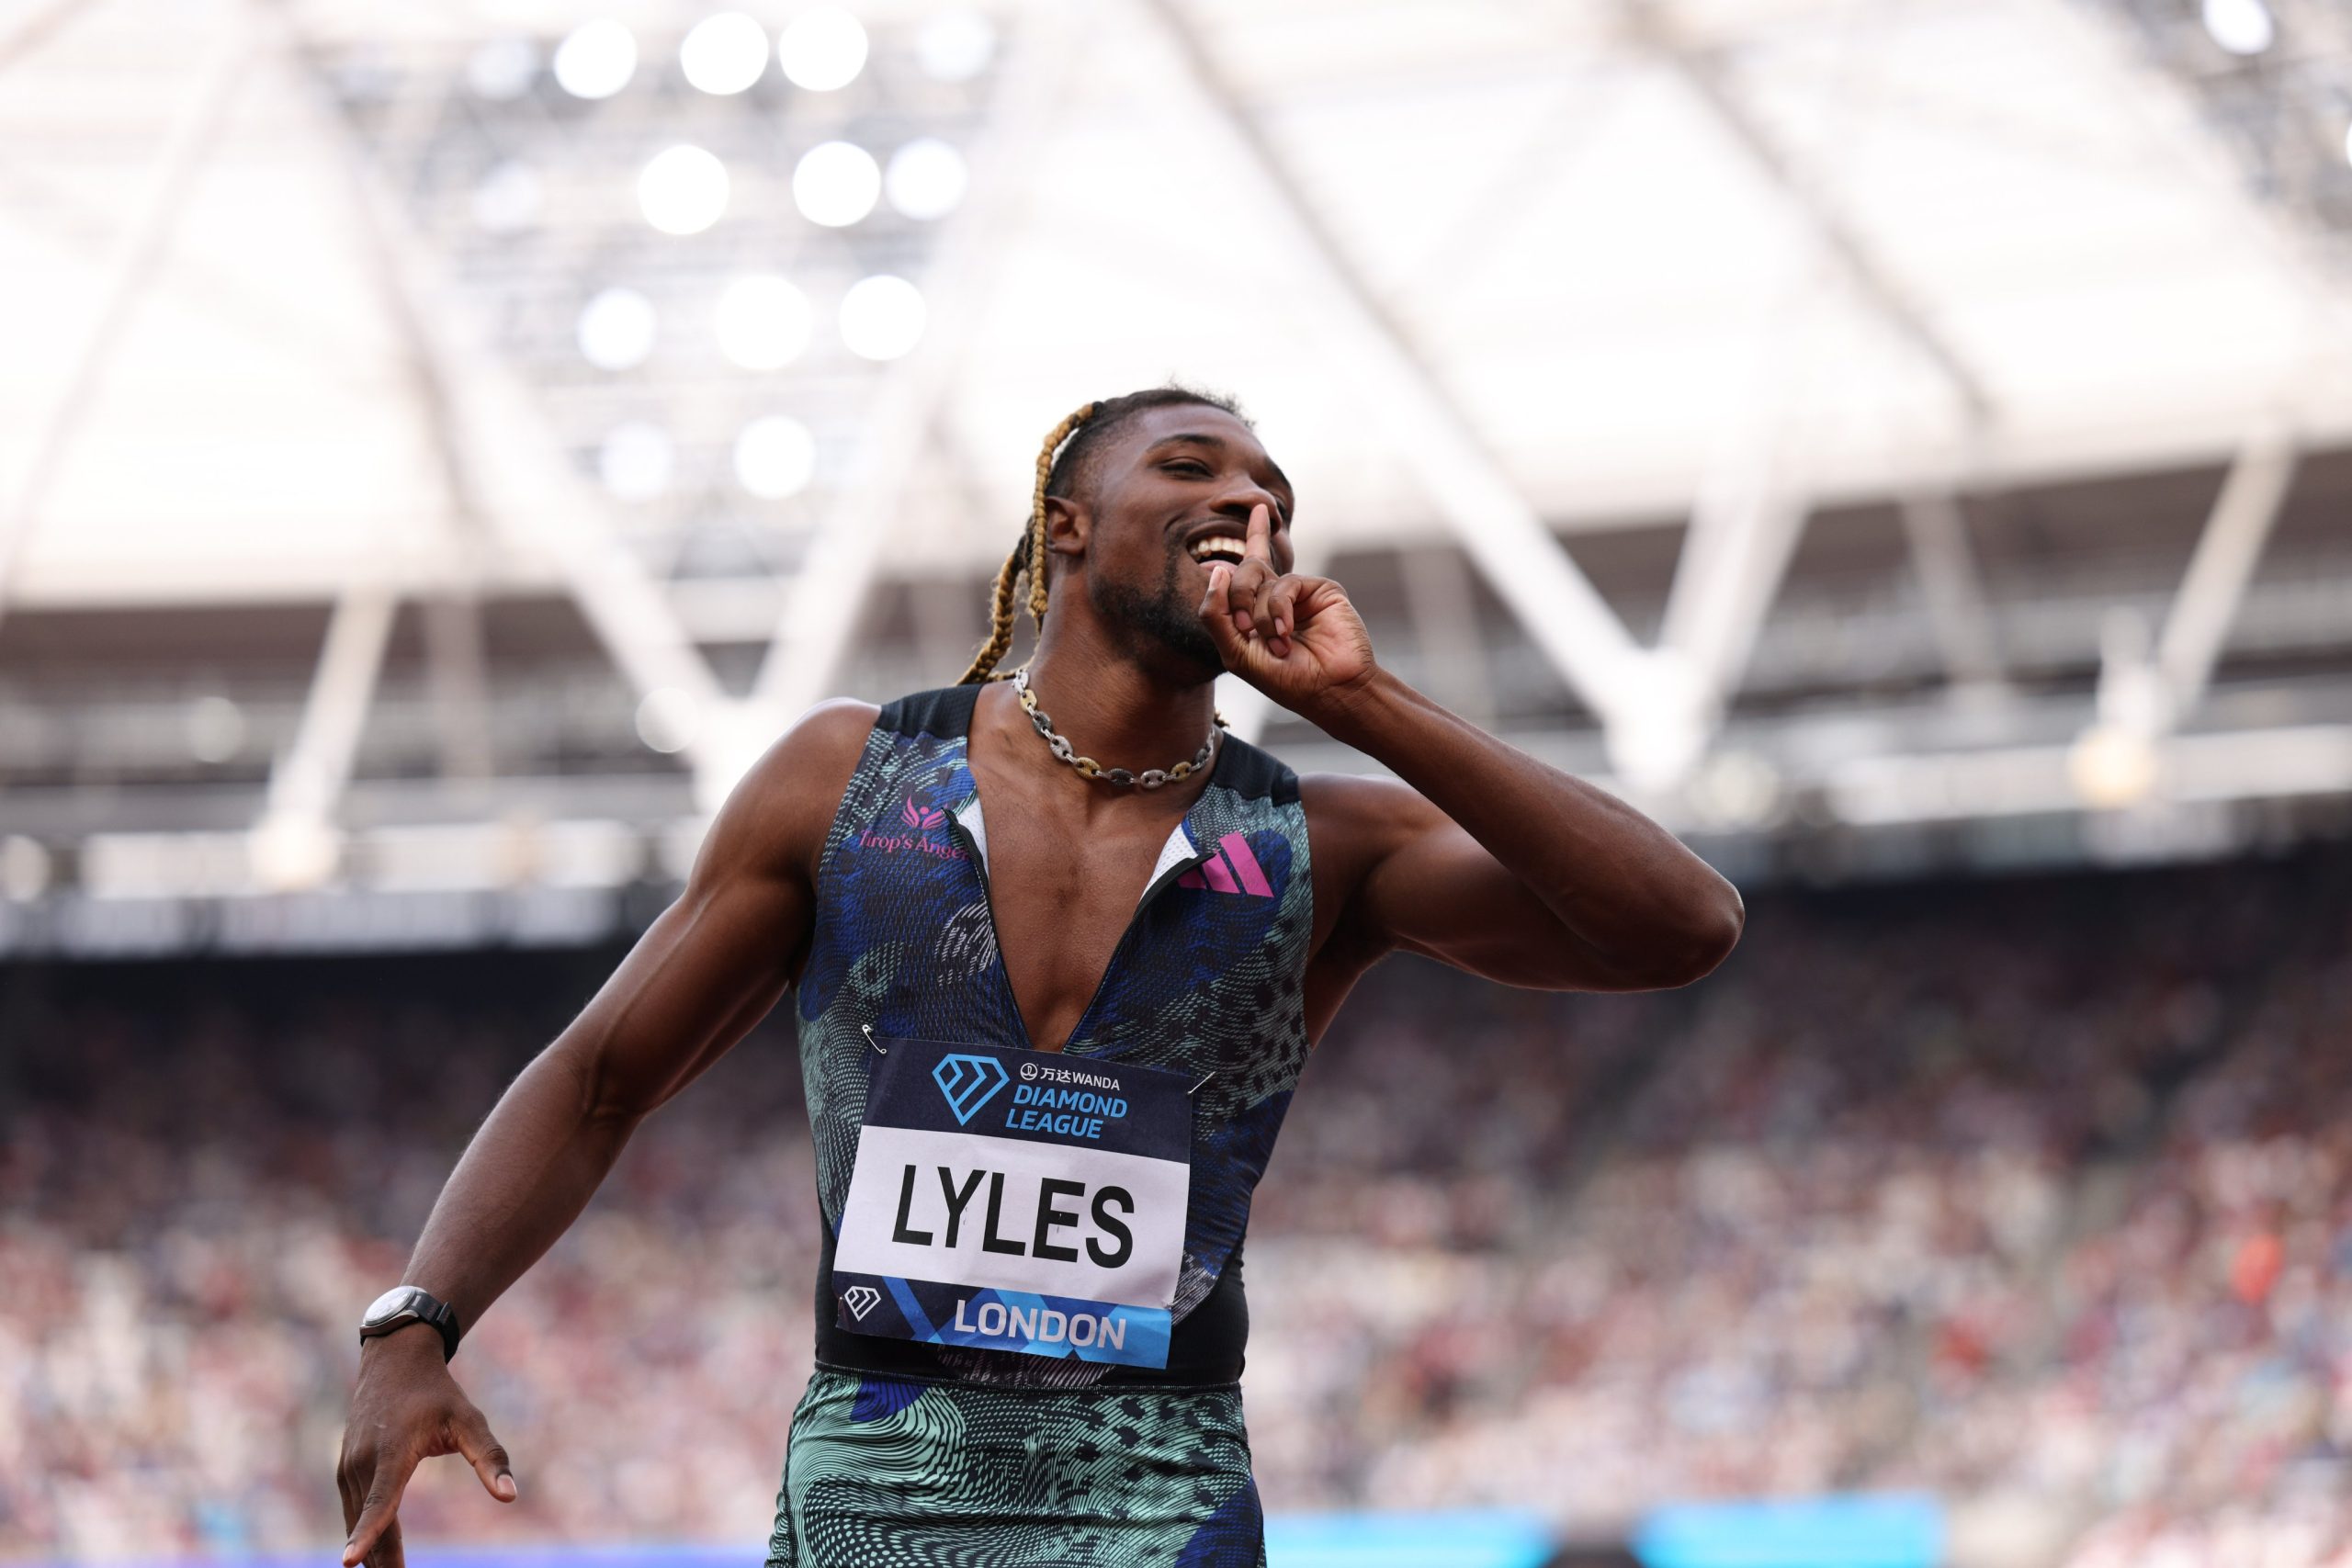 Now at Zurich Diamond League - Speed Demon! Noah Lyles dominates the men's 200m, setting a world-leading and meeting record time at the London Diamond League